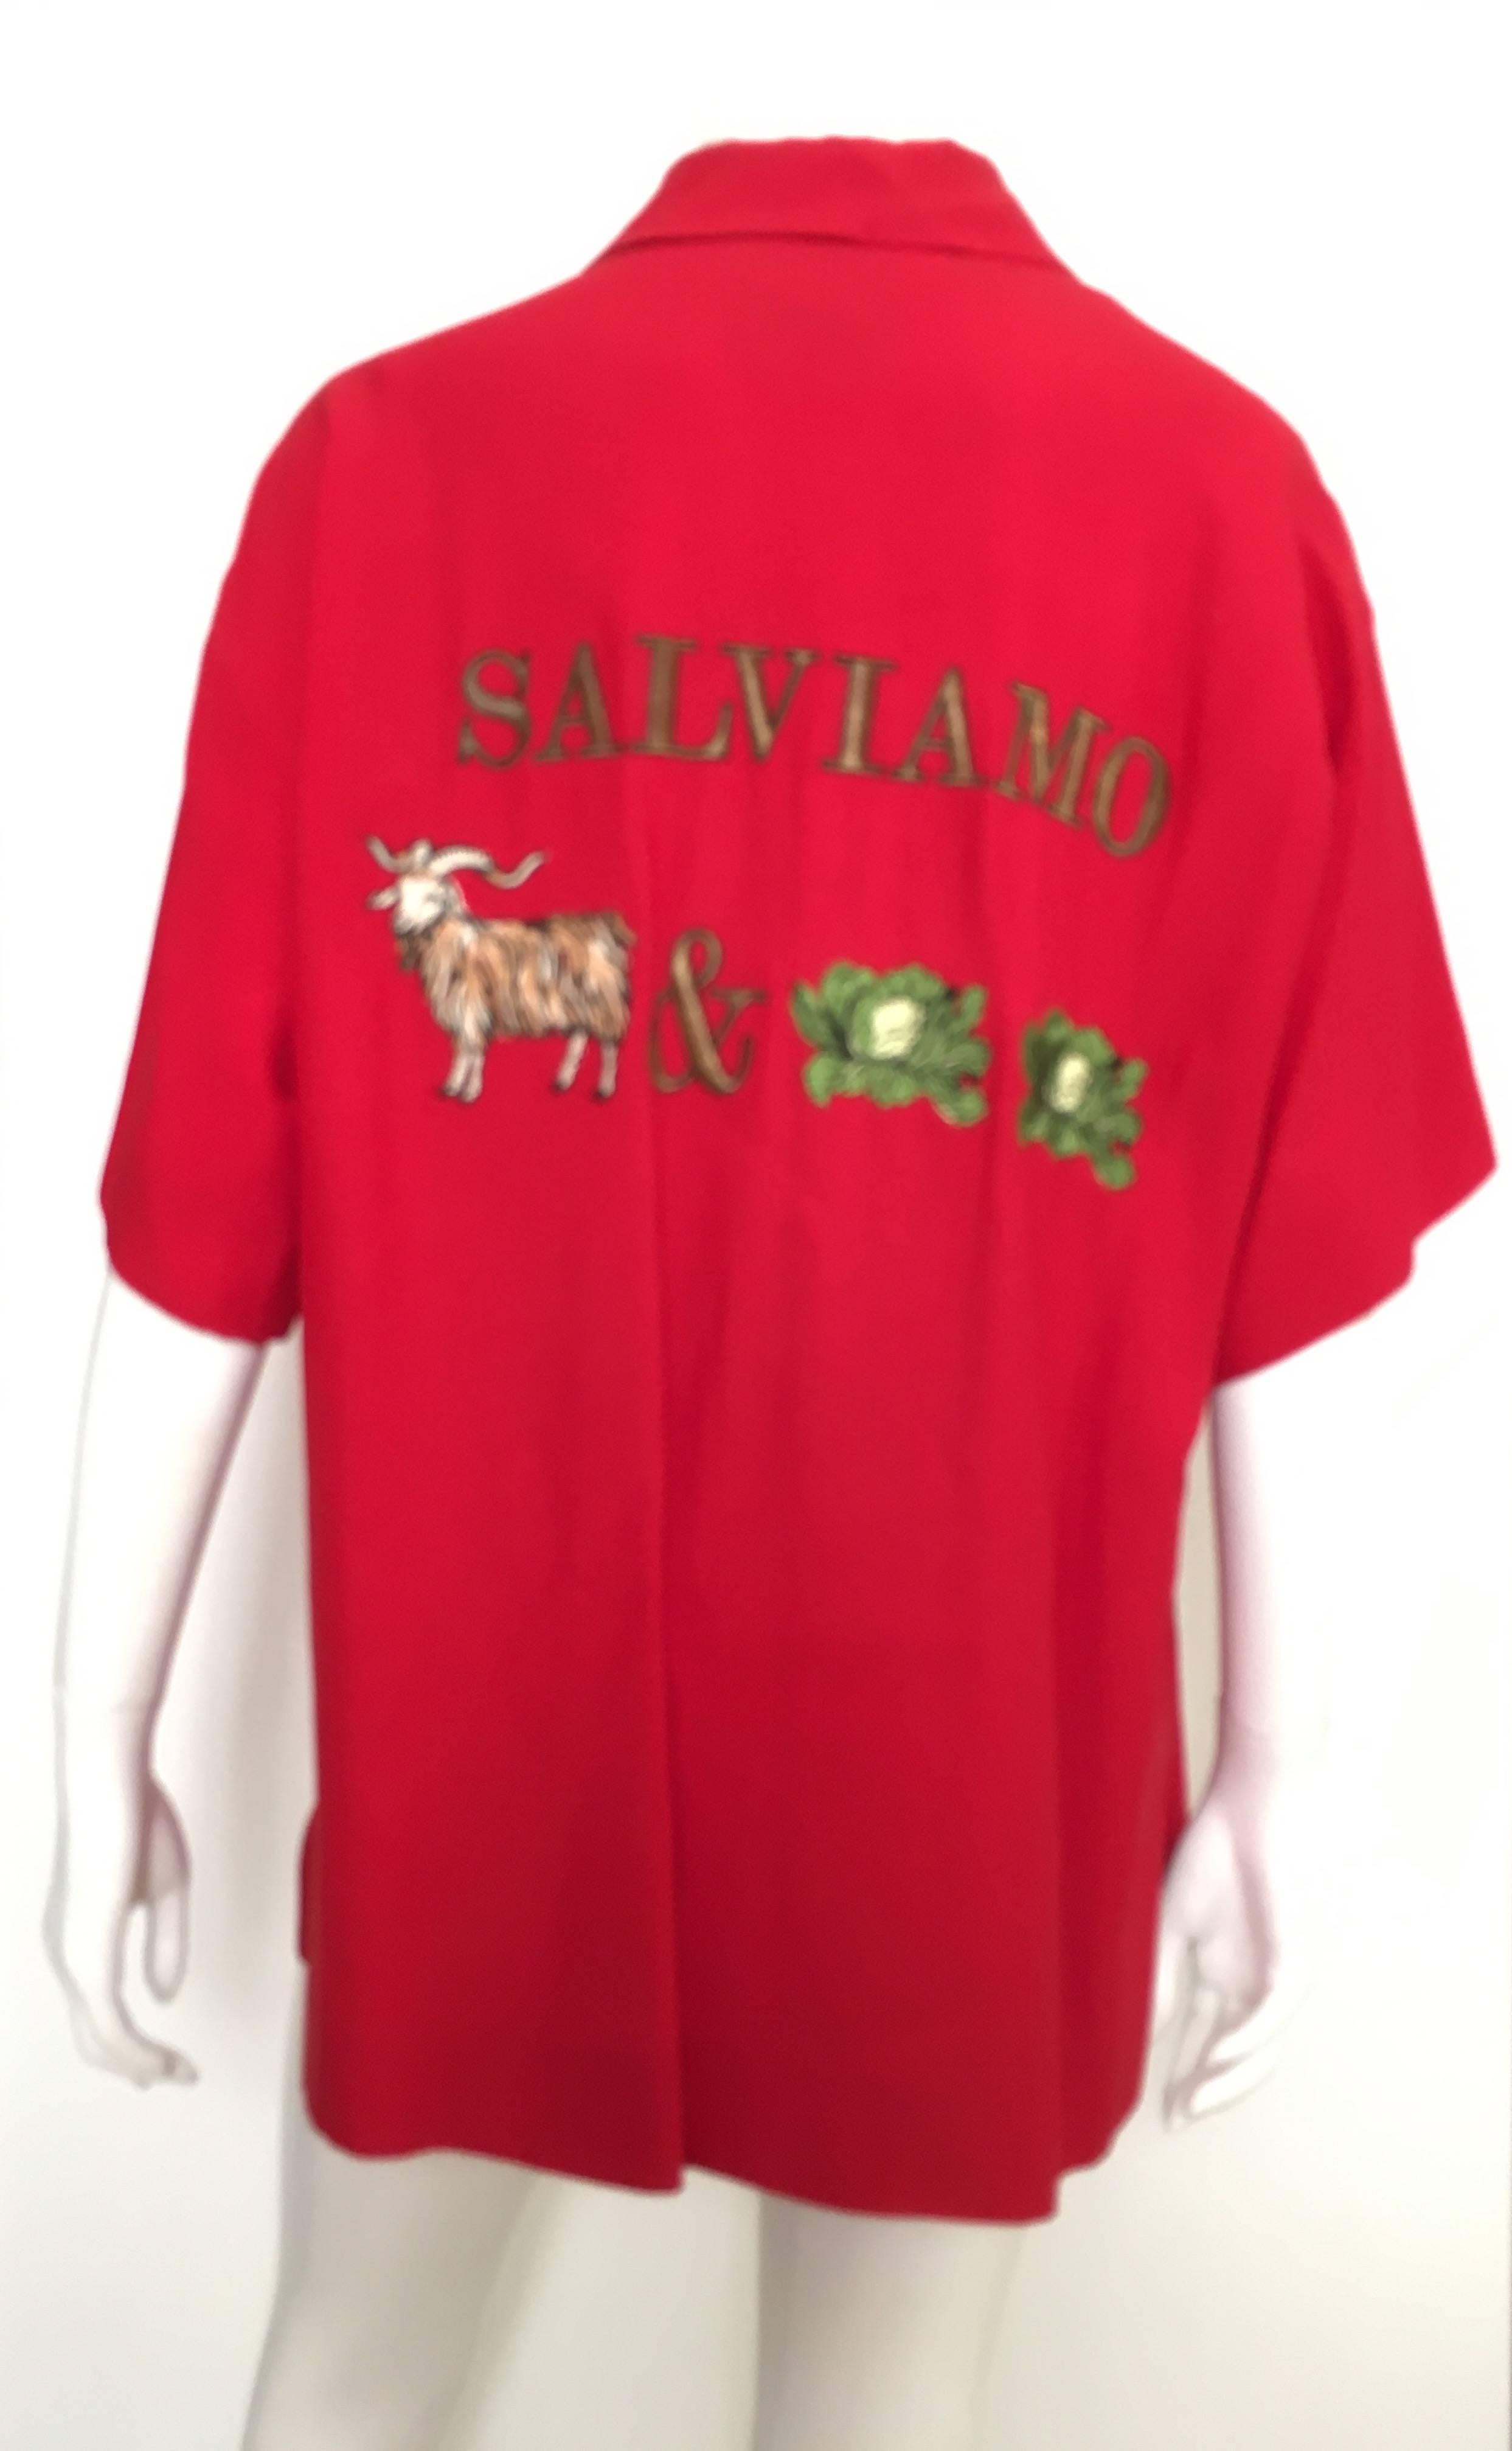 Red Moschino Couture Salviamo Blouse Size 10. For Sale